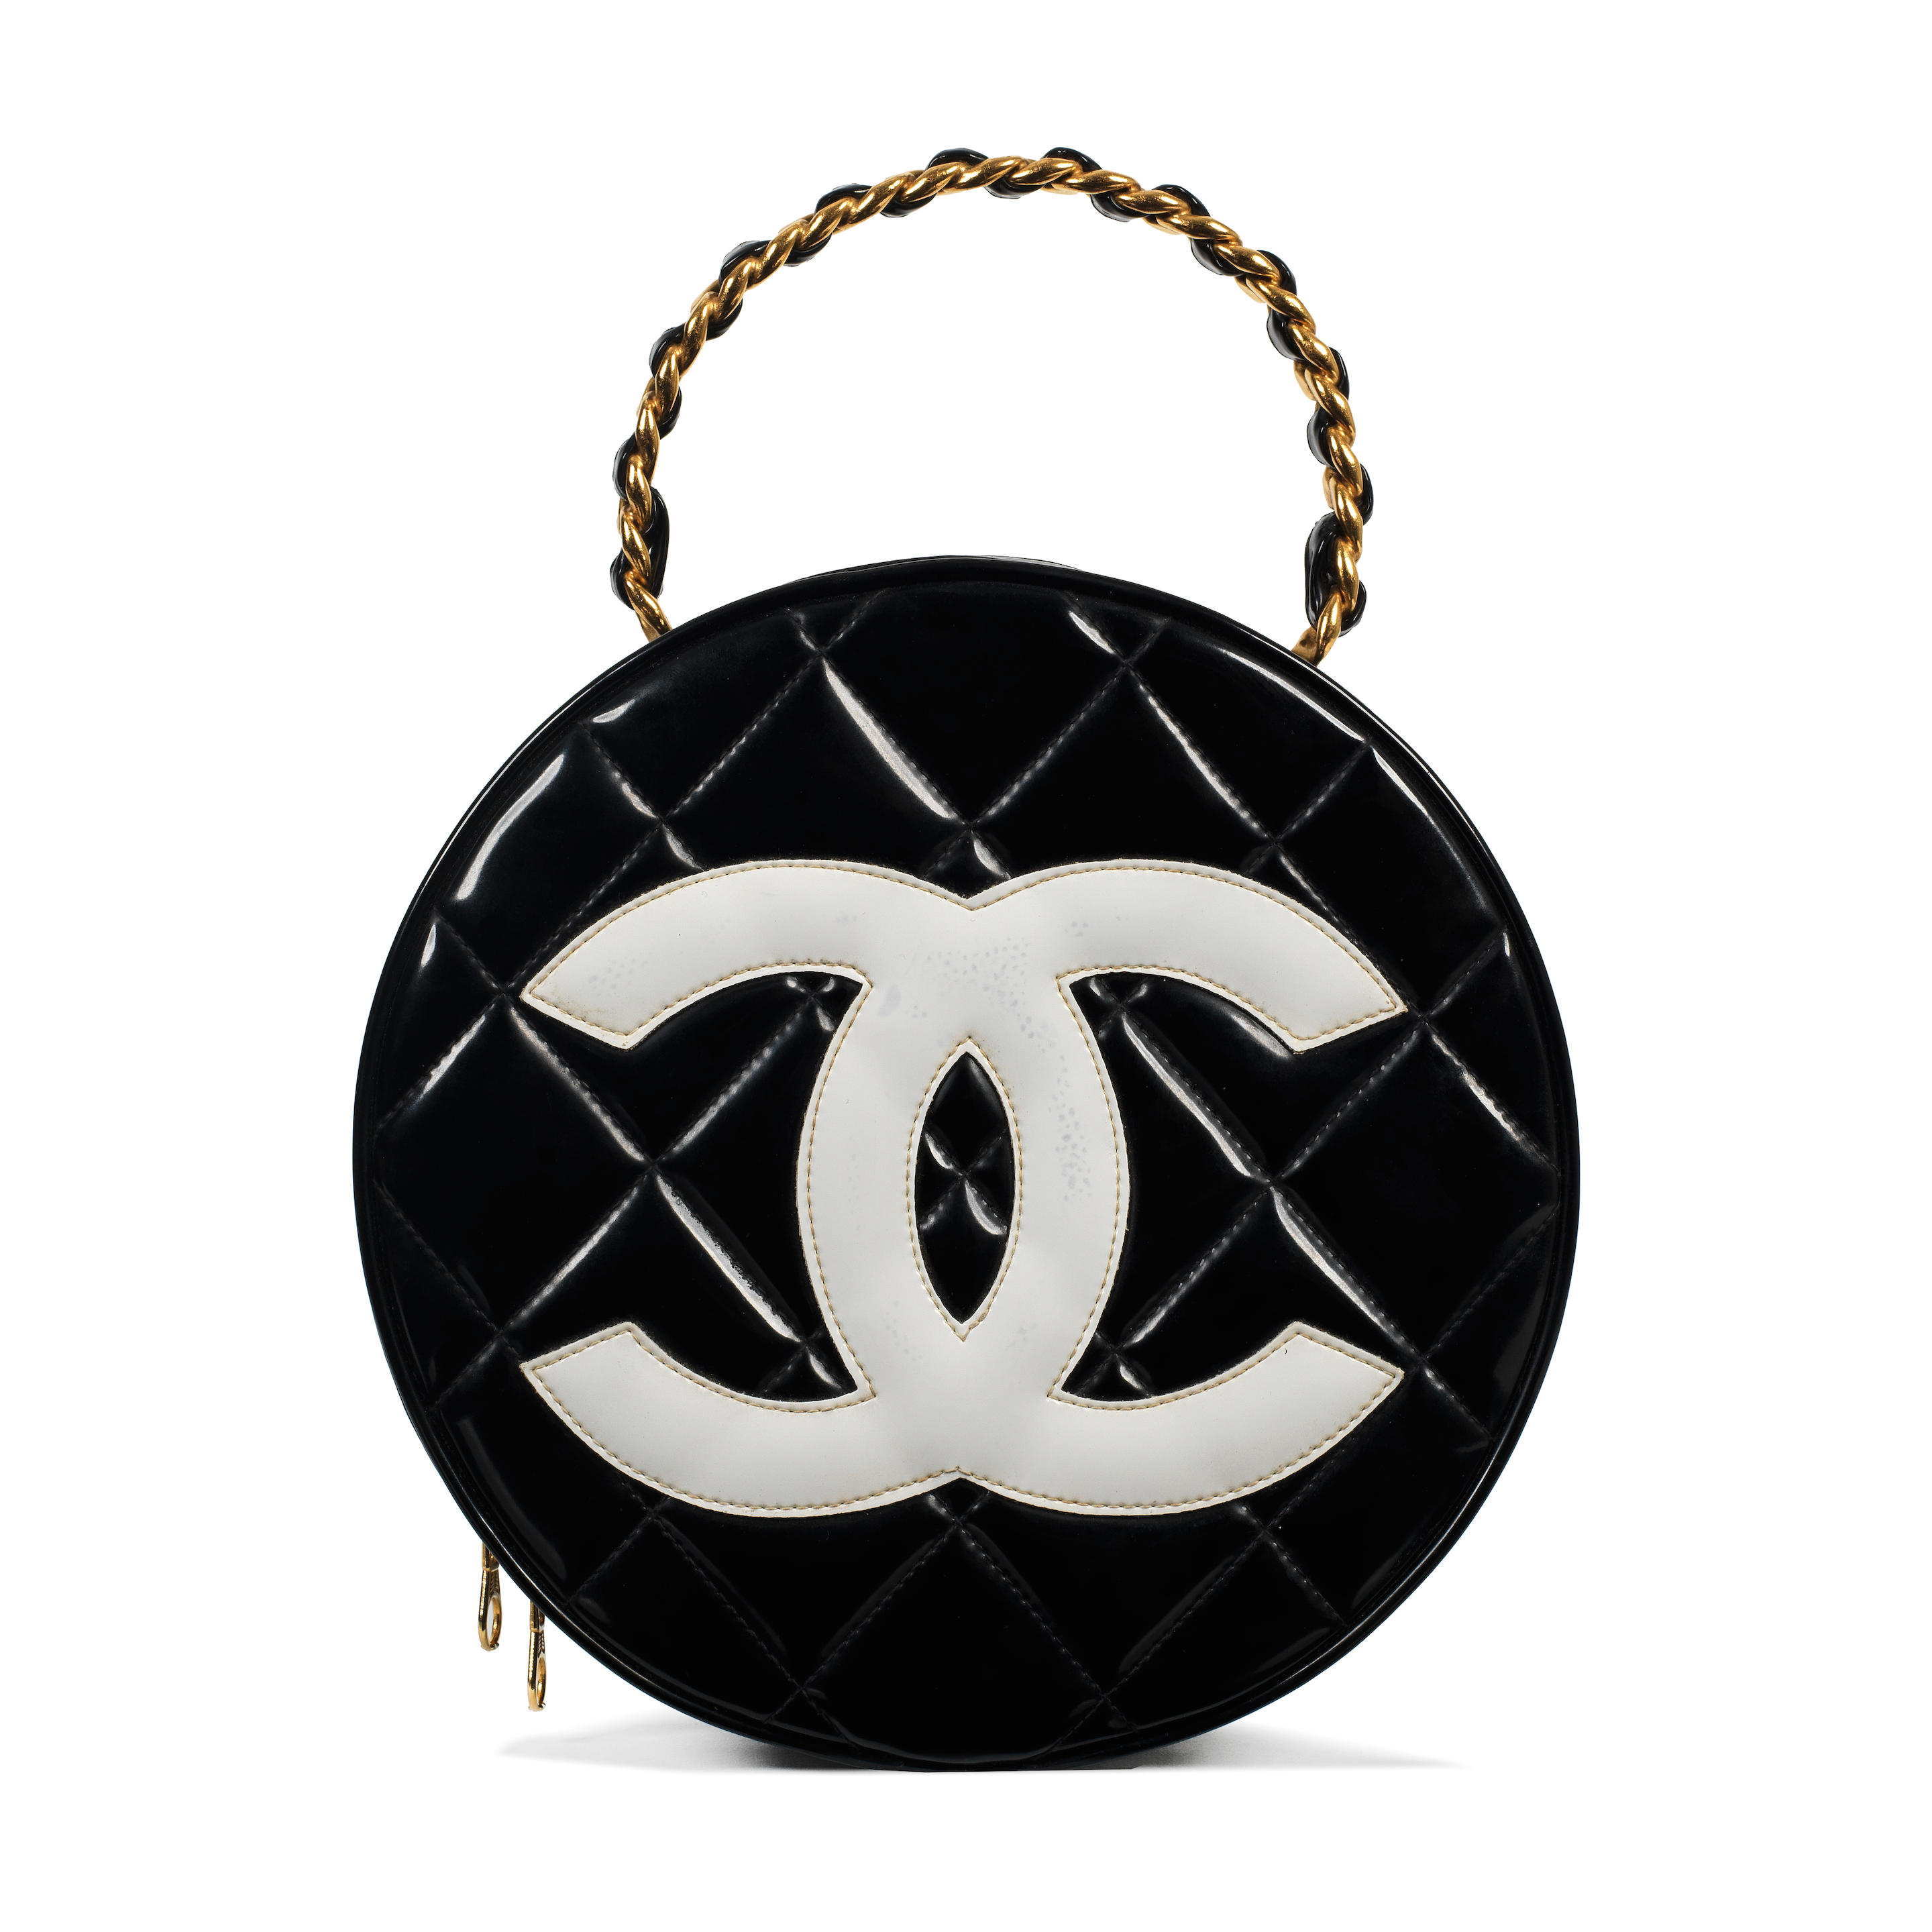 Bonhams : CHANEL BLACK LAMBSKIN SMALL VANITY CASE WITH TOP HANDLE GOLD  TONED CHAIN (Includes info booklet, authenticity card, original dust bag  and original box)